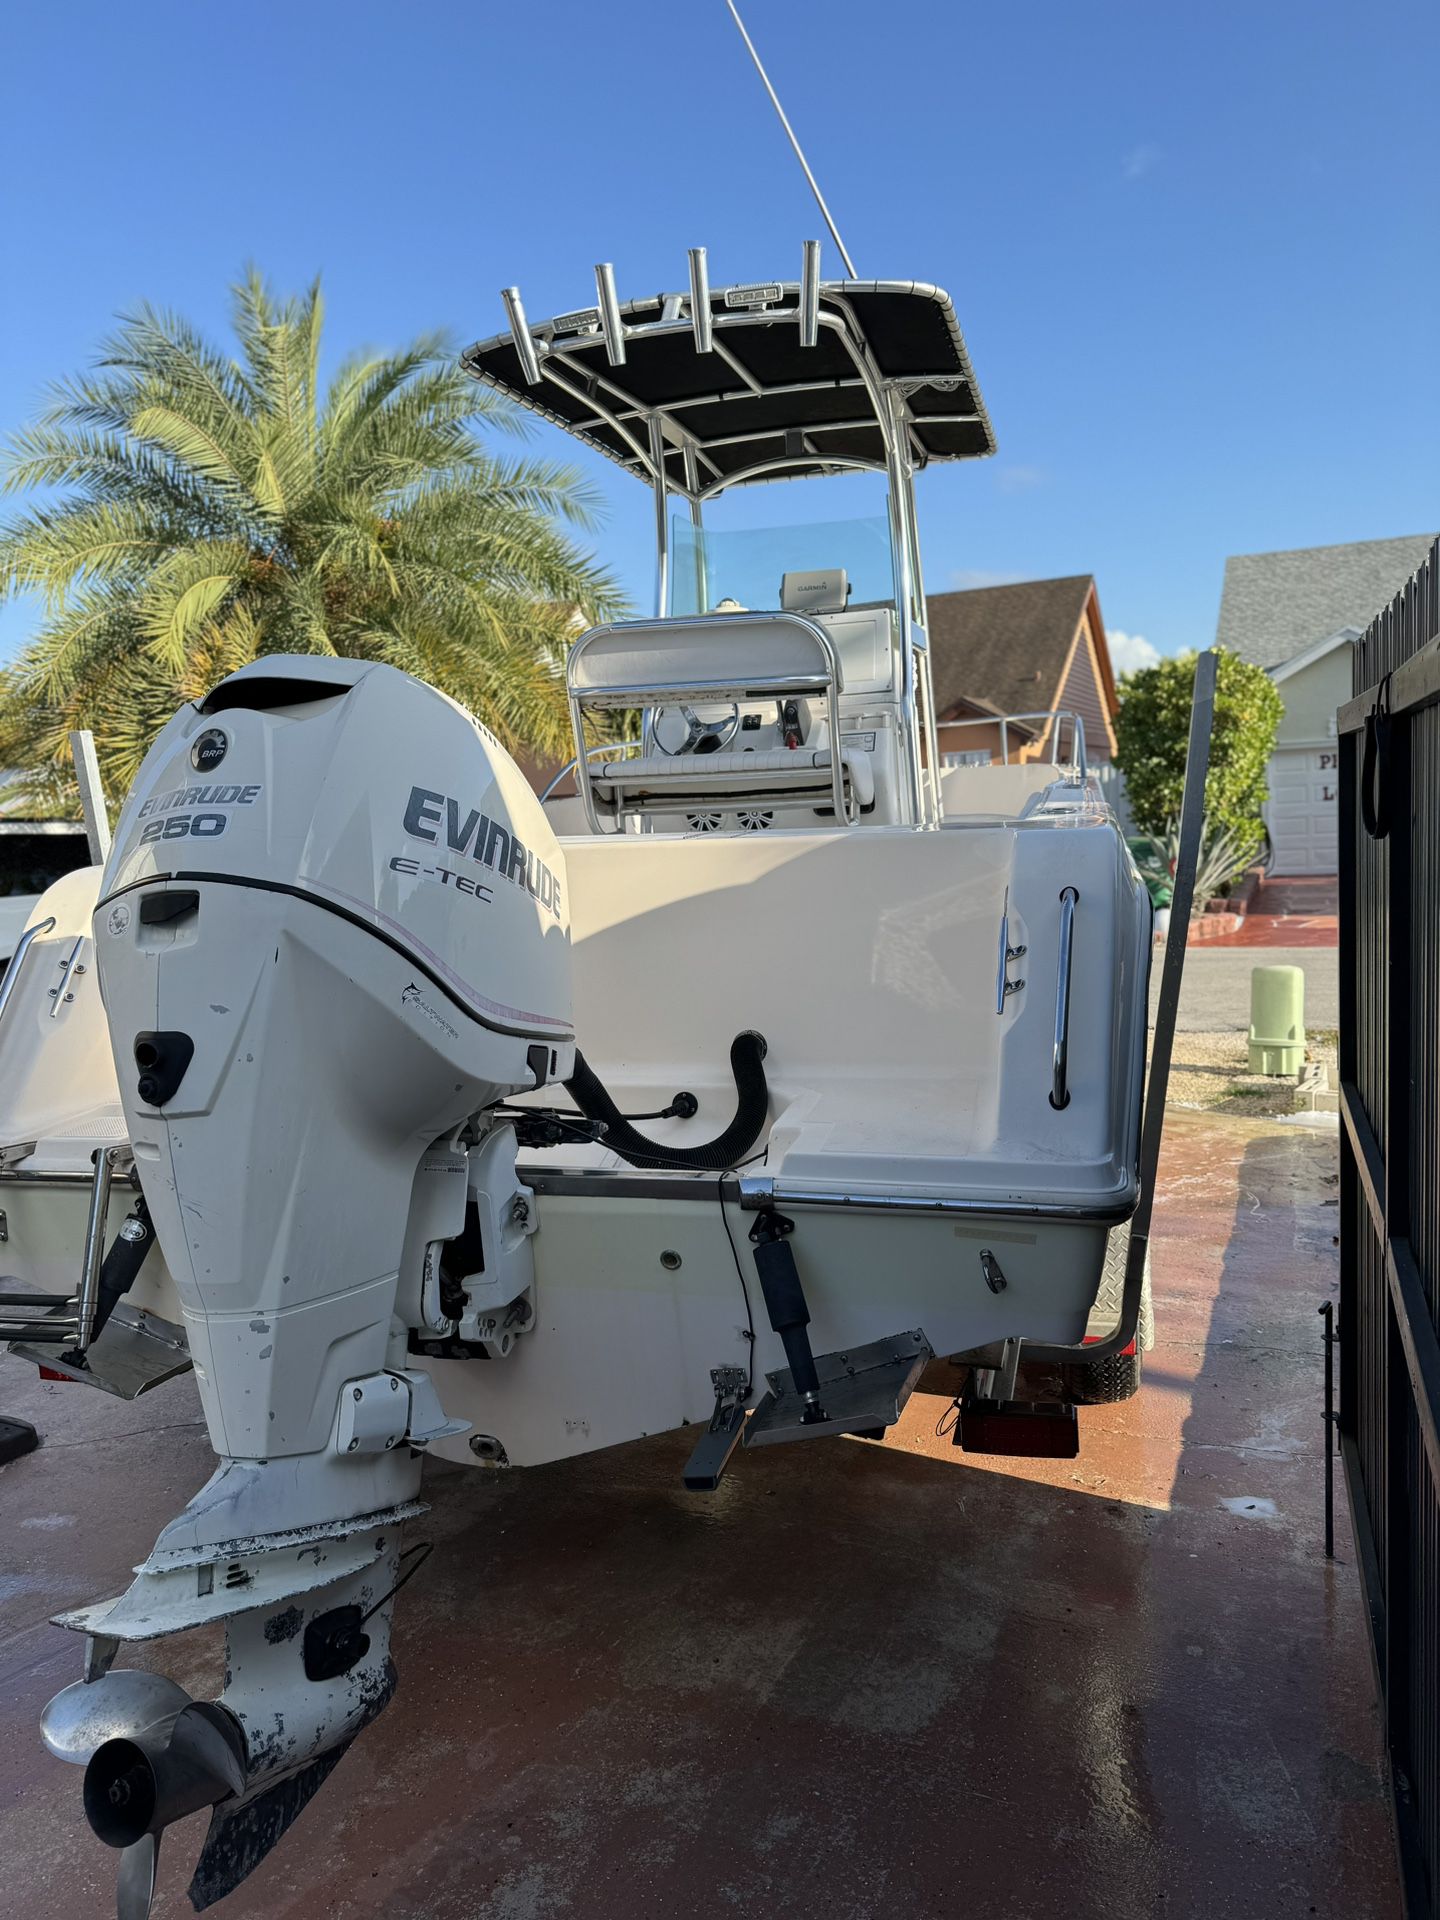 2007 Evinrude Etech 250 HP With 763 Hours